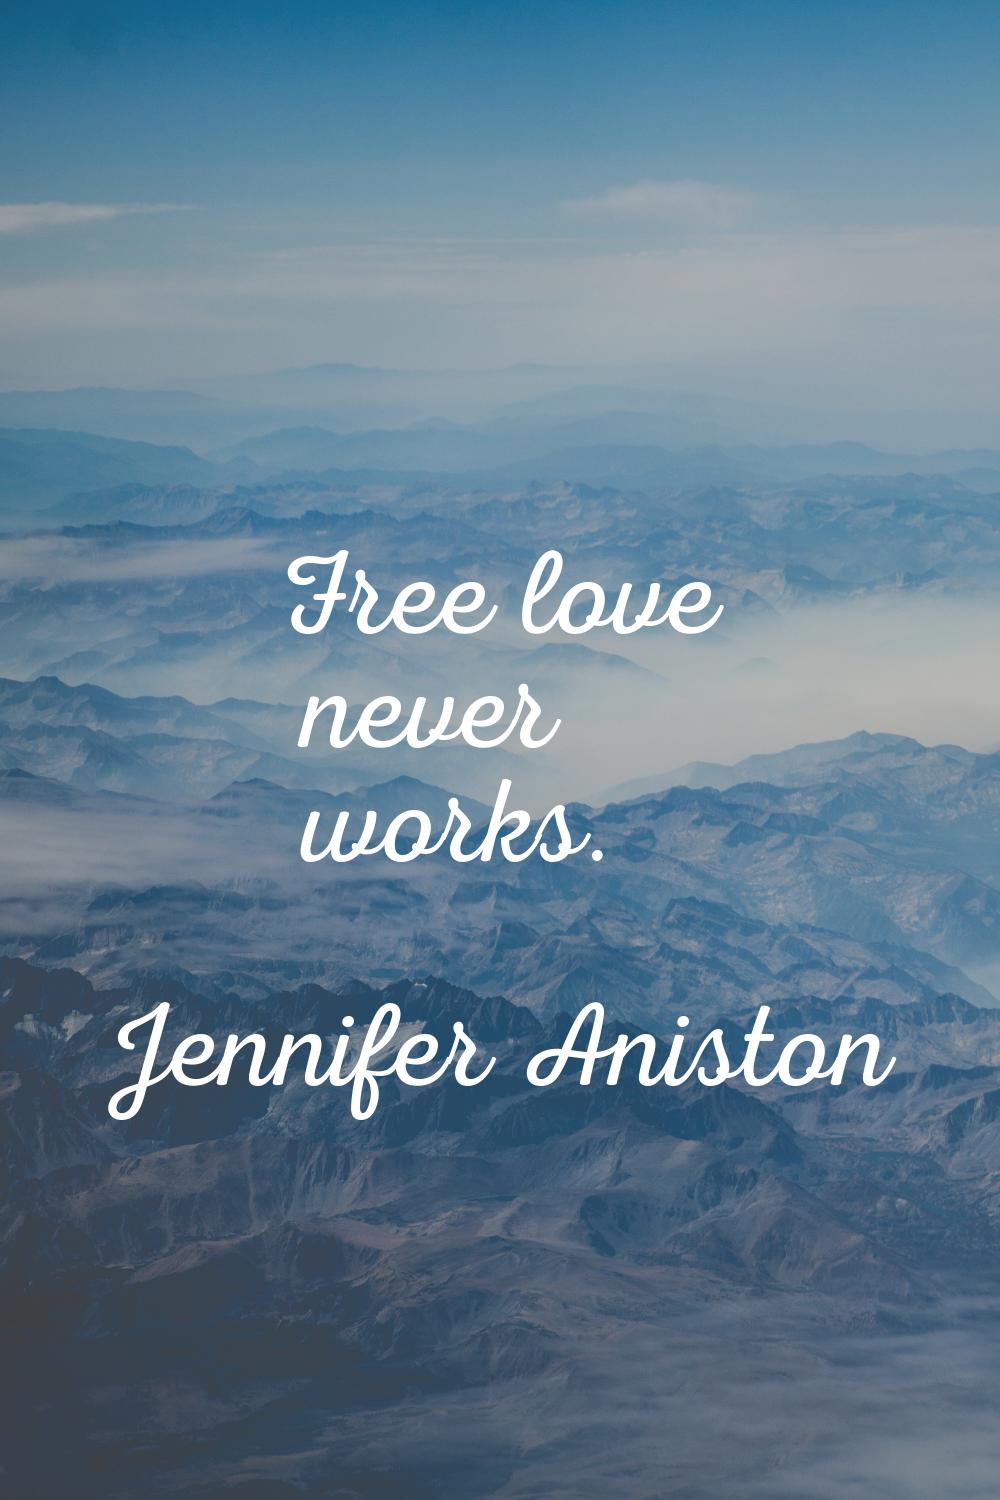 Free love never works.